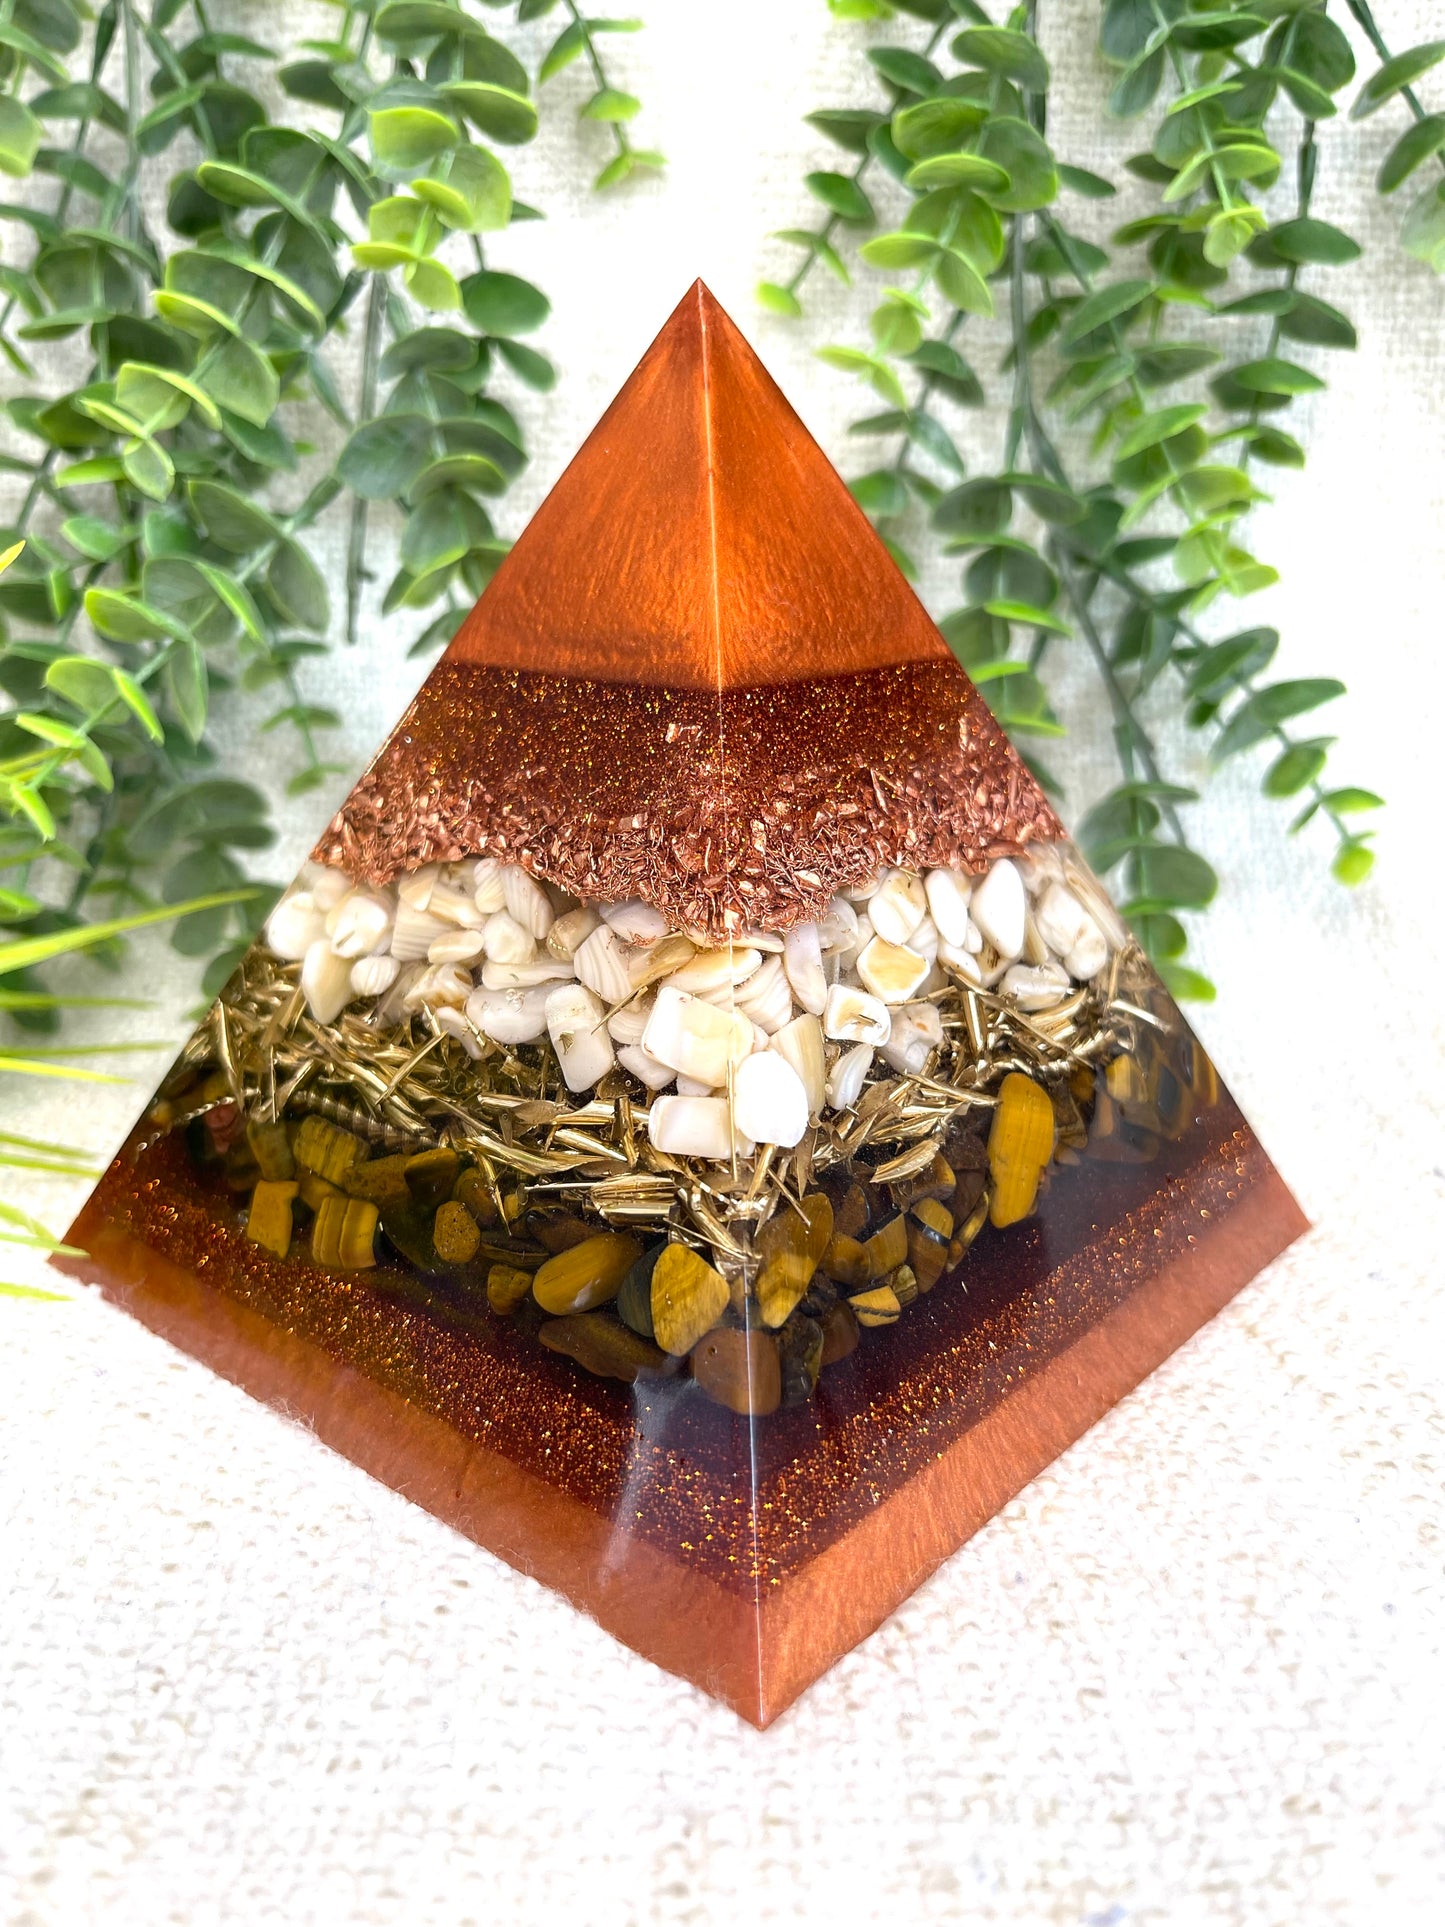 RUTH - Orgonite Pyramid - EMF Protector - Tiger's Eye Crystal, Seashell and Copper and Brass metals